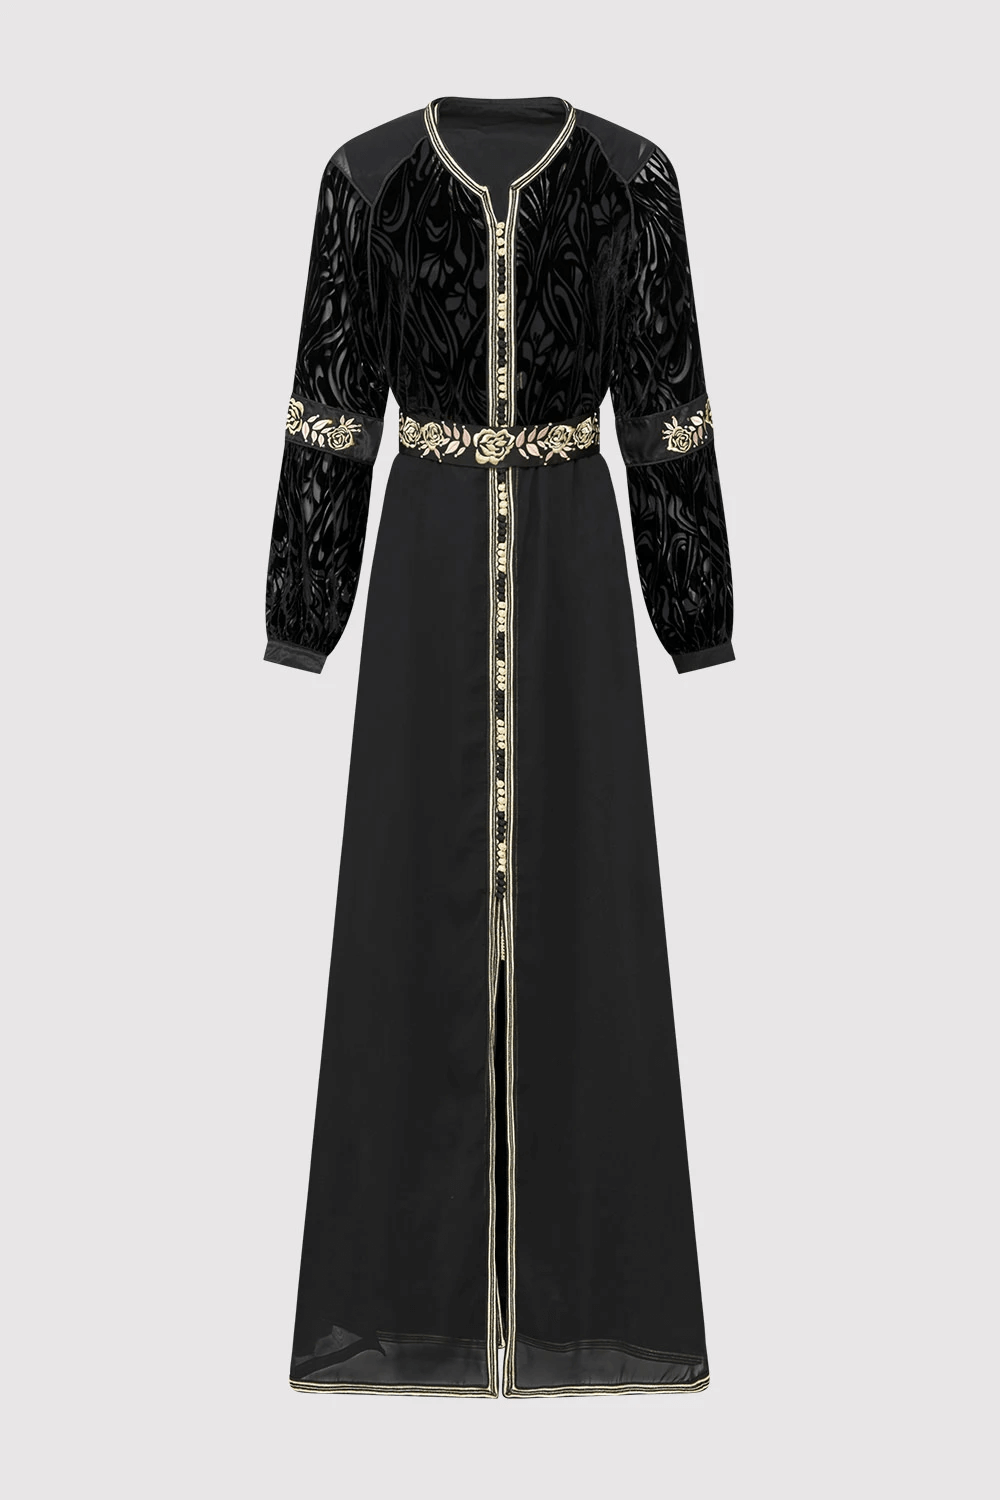 Lebssa Edwige Special Occasion Formal Long Dress with Sheer Velour Sleeves and Belt in Black